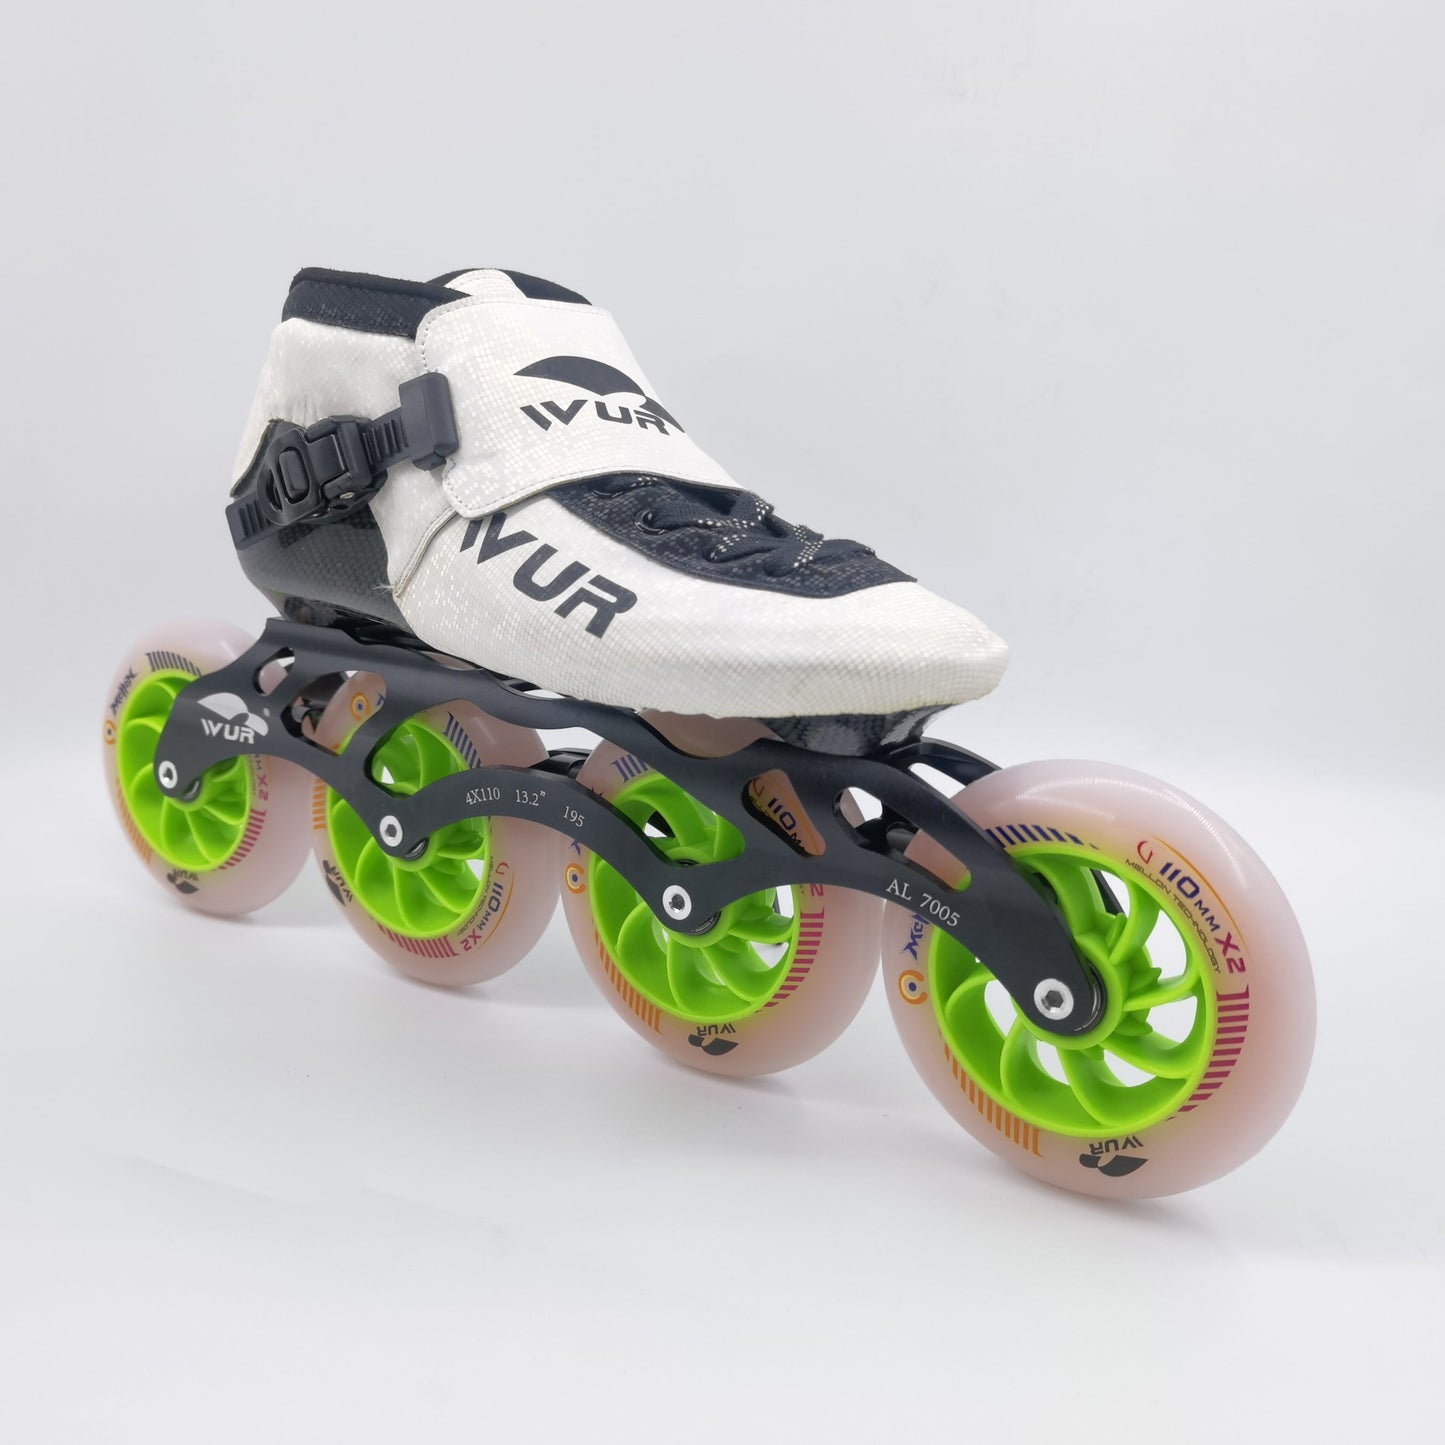 WUR Skates brand inline Speed Skates F1 black and white Color With Double Hardness Wheel